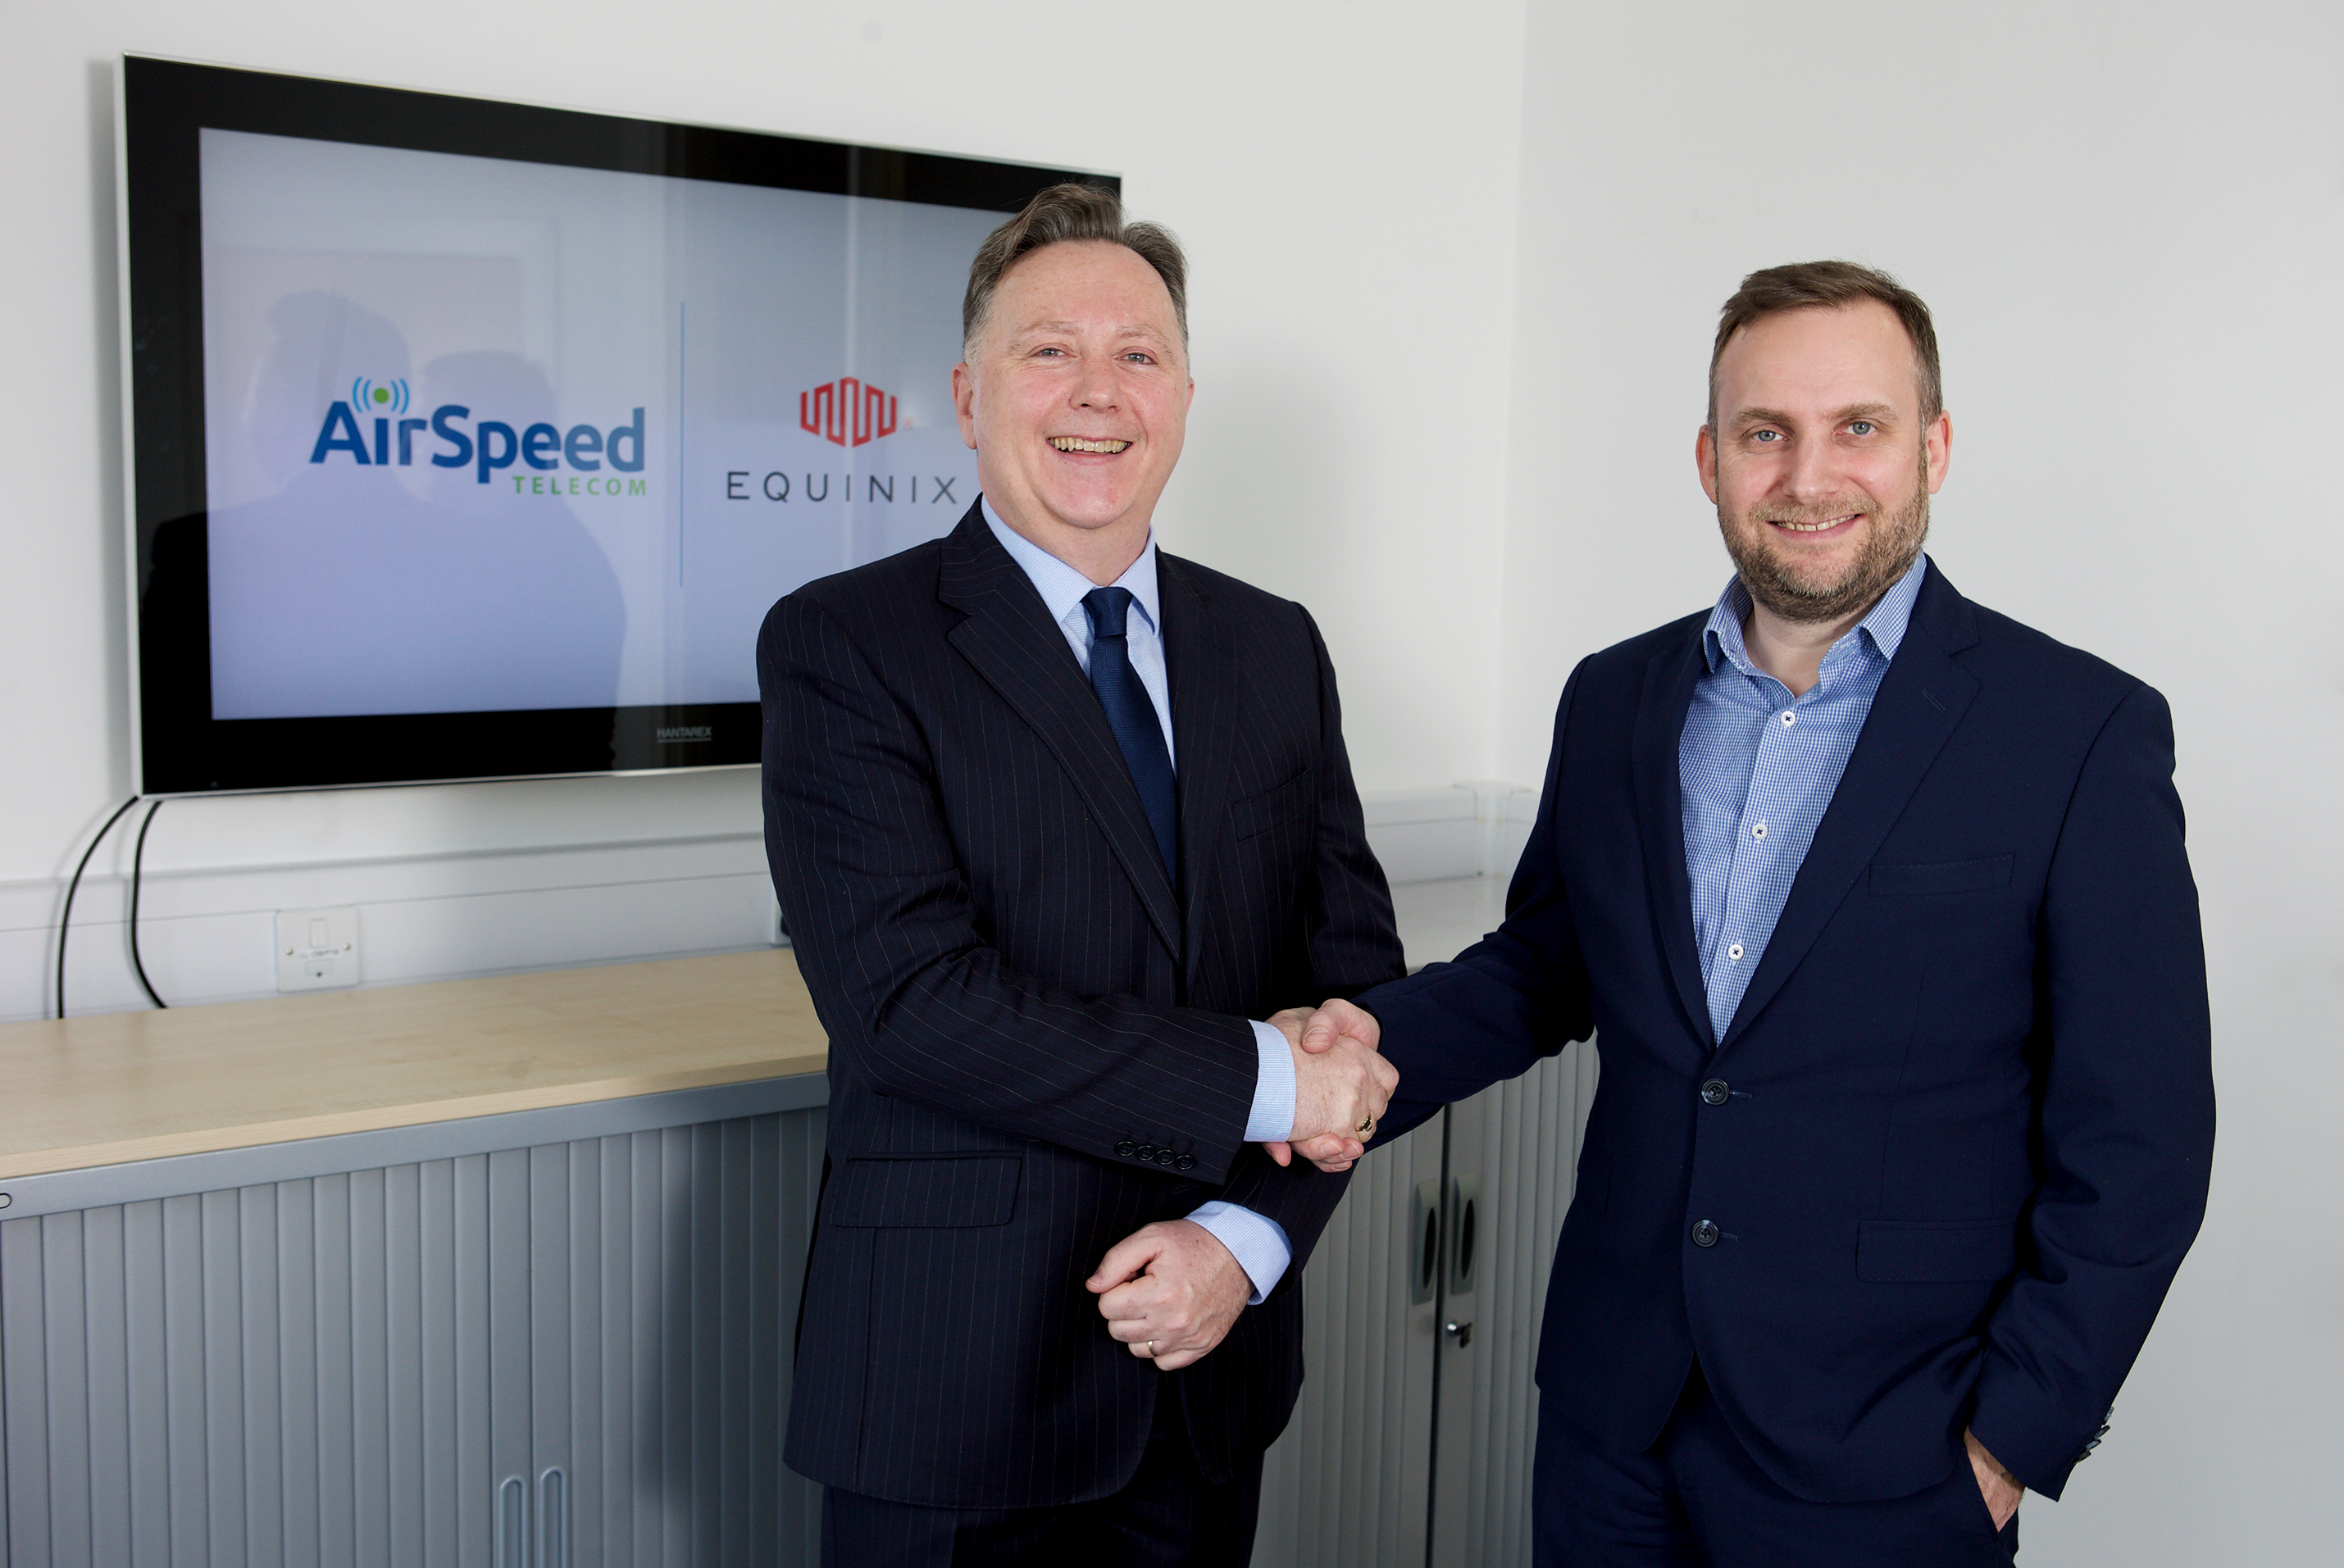 AirSpeed partners with Equinix to provide secure cloud solution